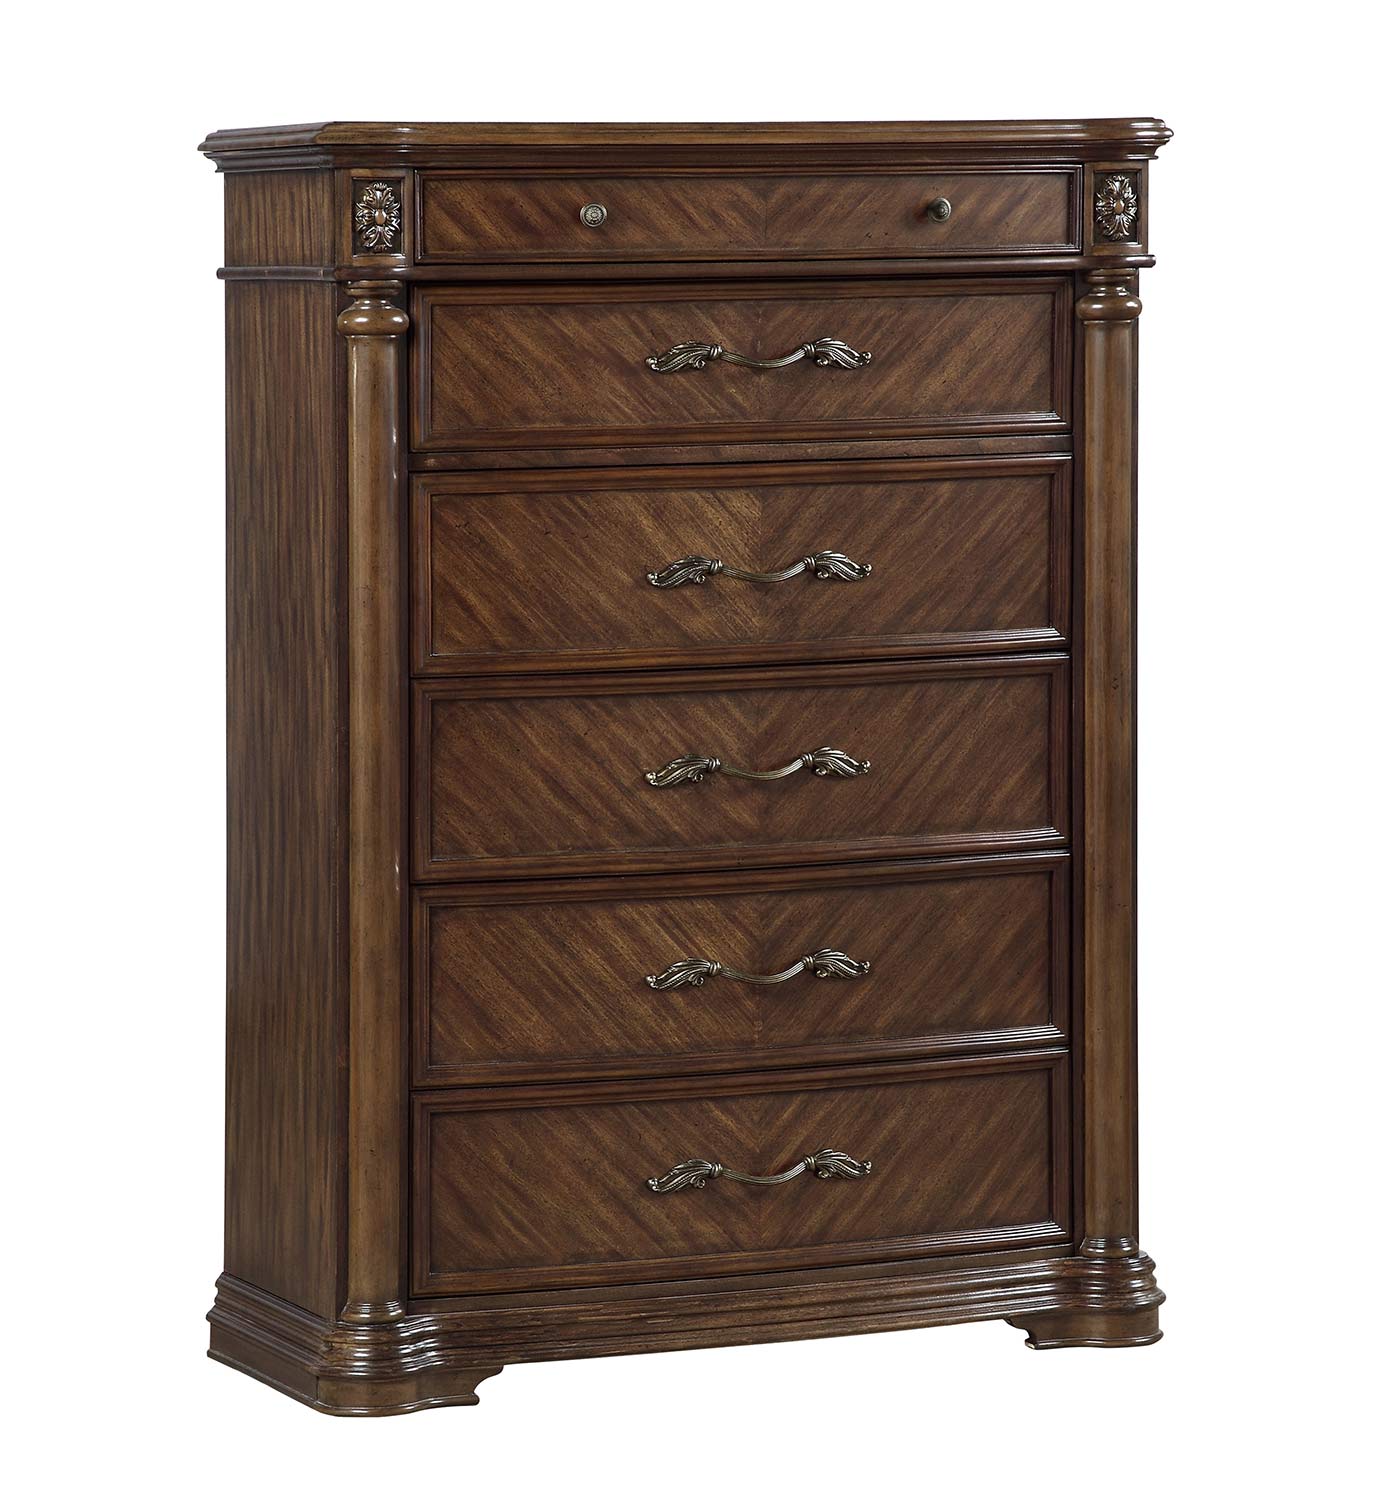 Homelegance Barbary Chest - Traditional Cherry